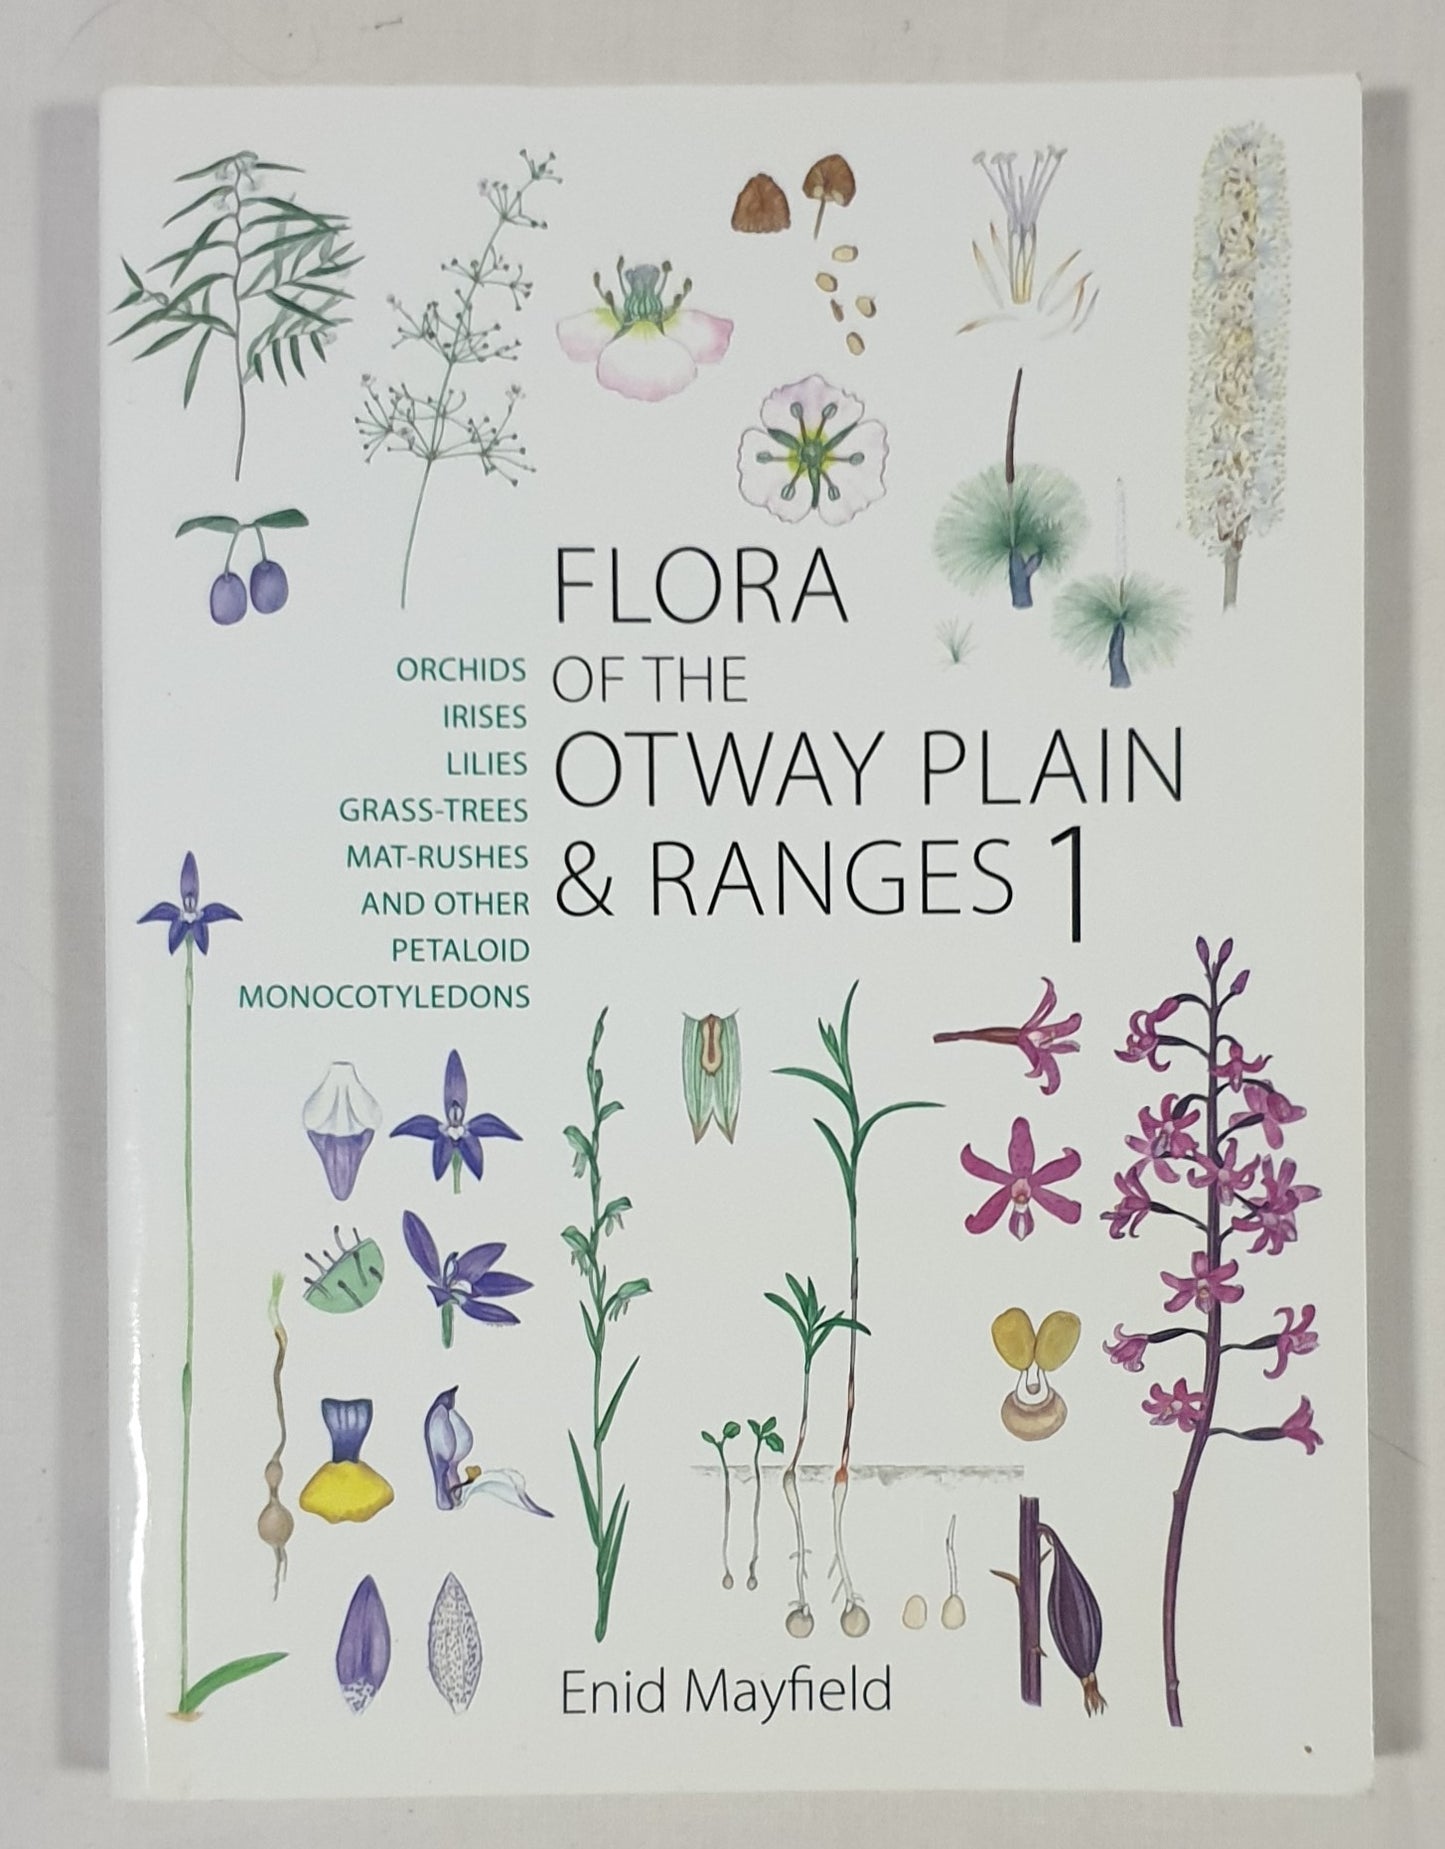 Flora of the Otway Plain & Ranges 1 by Enid Mayfield